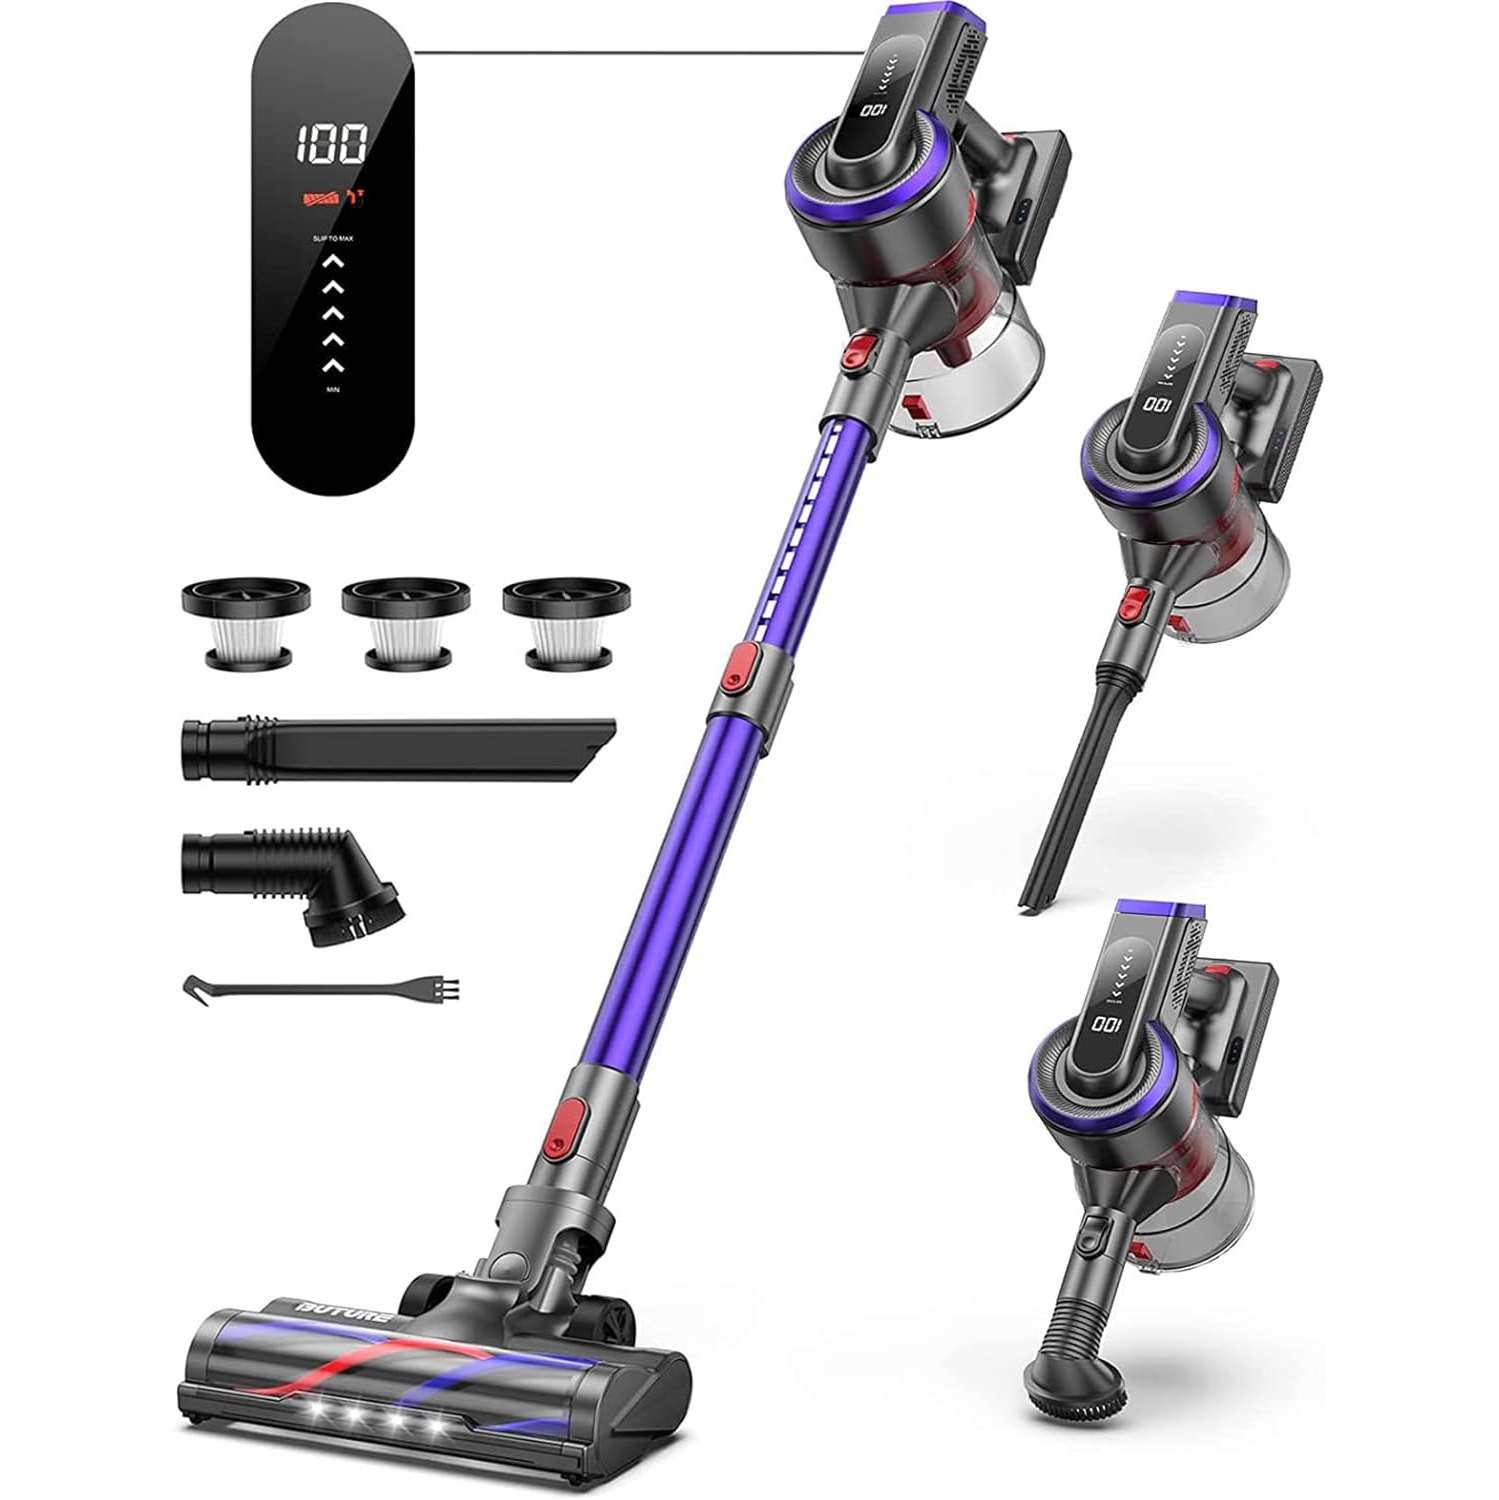 BuTure Vacuum Cleaner, JR400 Cordless Stick Vacuum Cleaner with Touch Display, 33KPa/400W, up to 55 Min, Smart LED Display, for Hard Floors, Carpet, Pet Hair